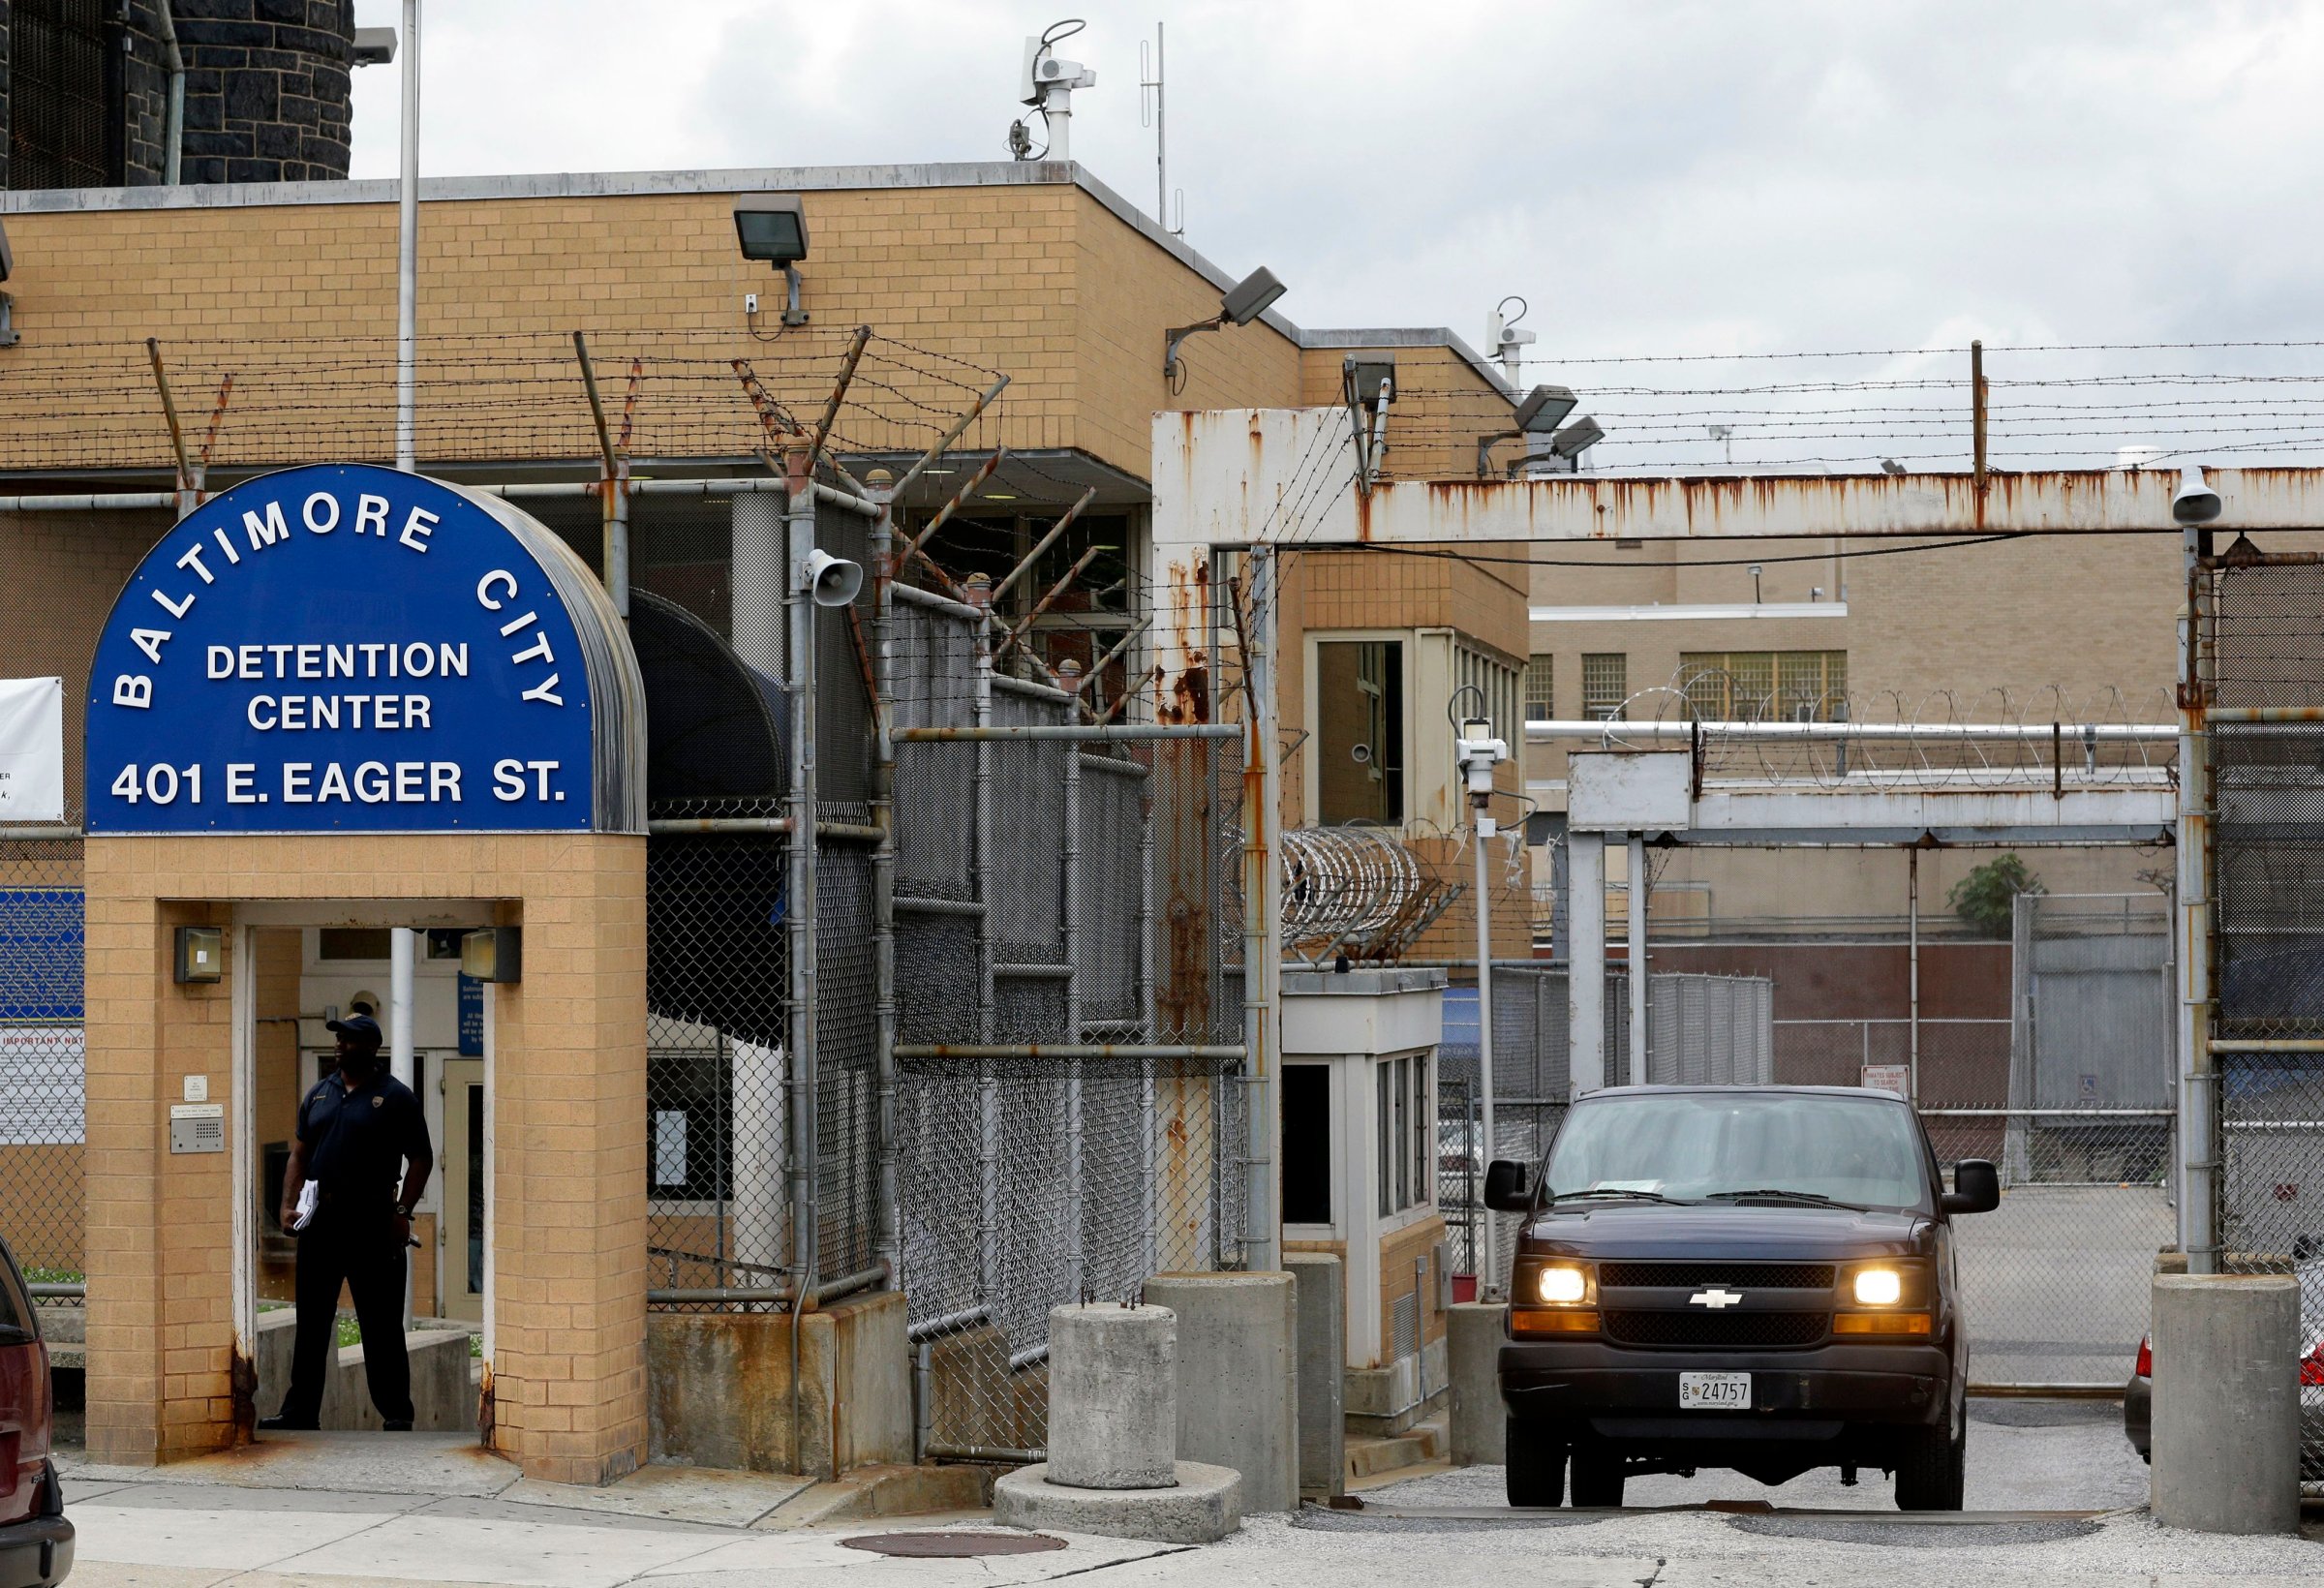 An inmate transport van departs from the Baltimore City Detention Center in Baltimore on June 6, 2013.